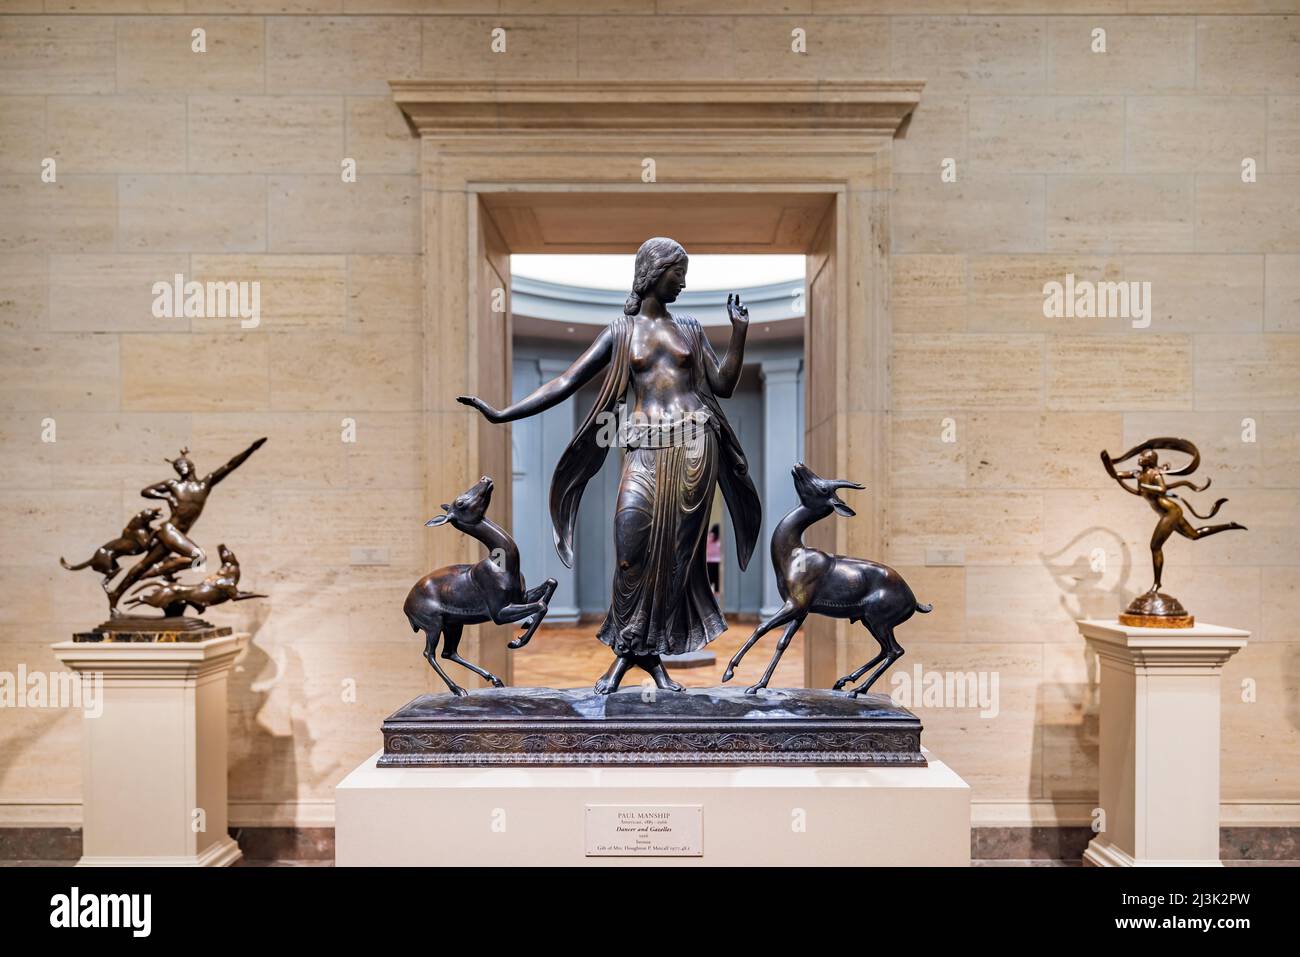 Washington DC, MAR 31 2022 - Interior view of the National Gallery of Art Stock Photo